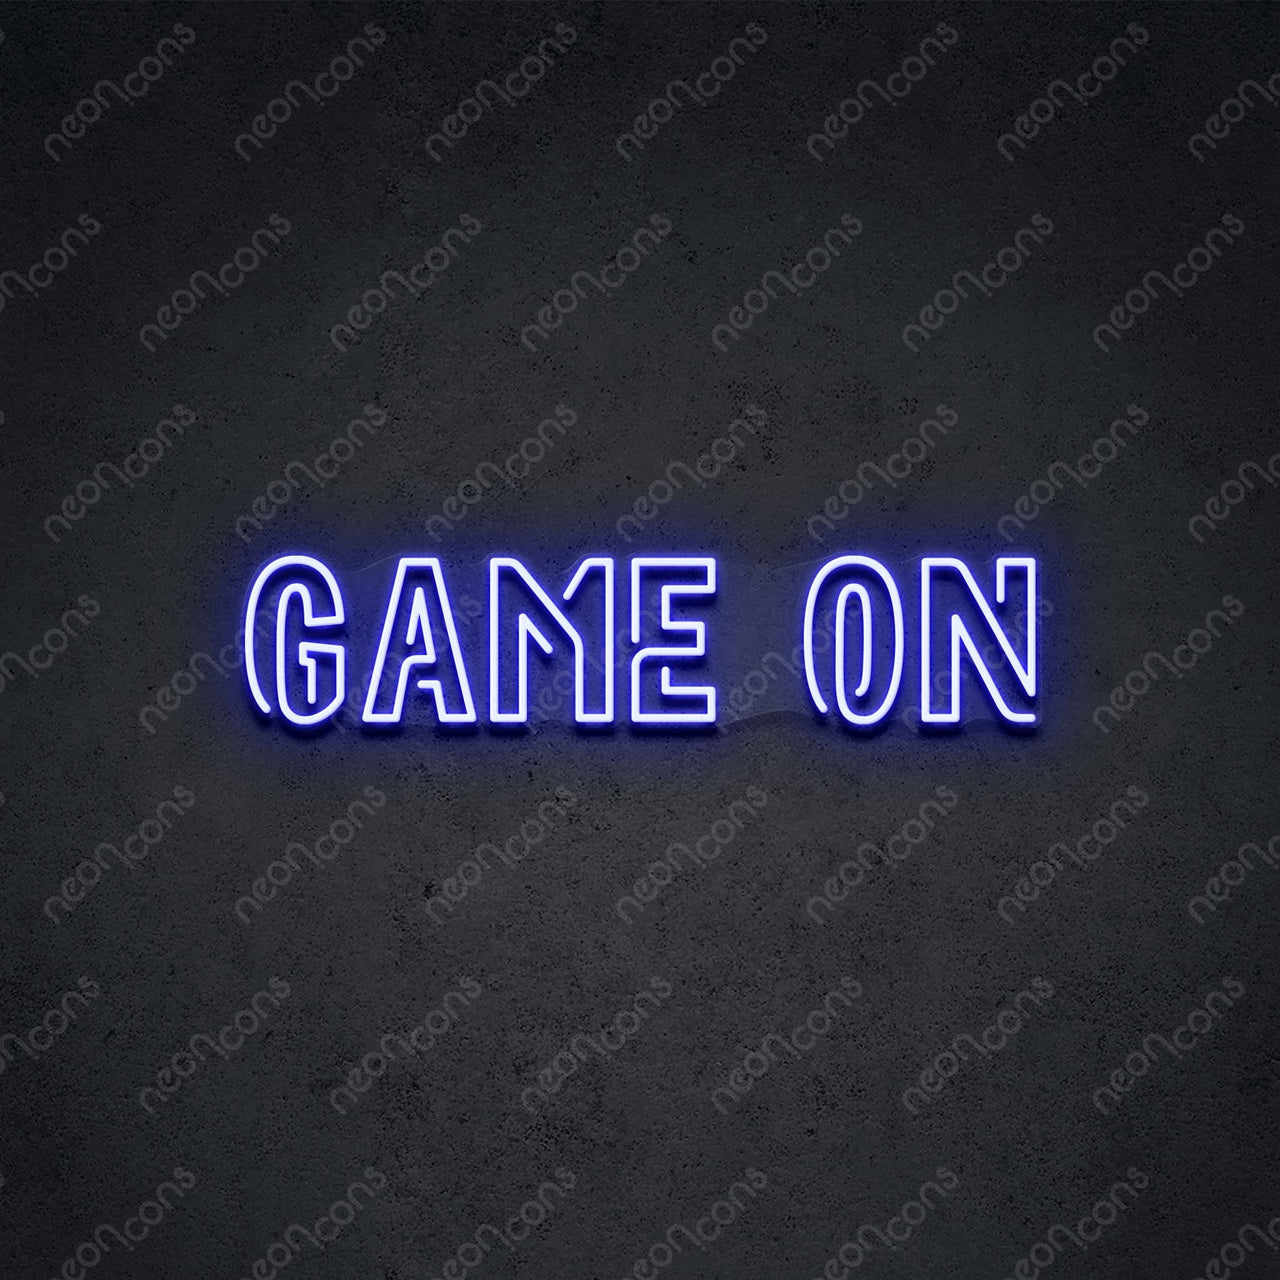 "Game On" Neon Sign 2ft x 0.55ft / Blue / LED Neon by Neon Icons